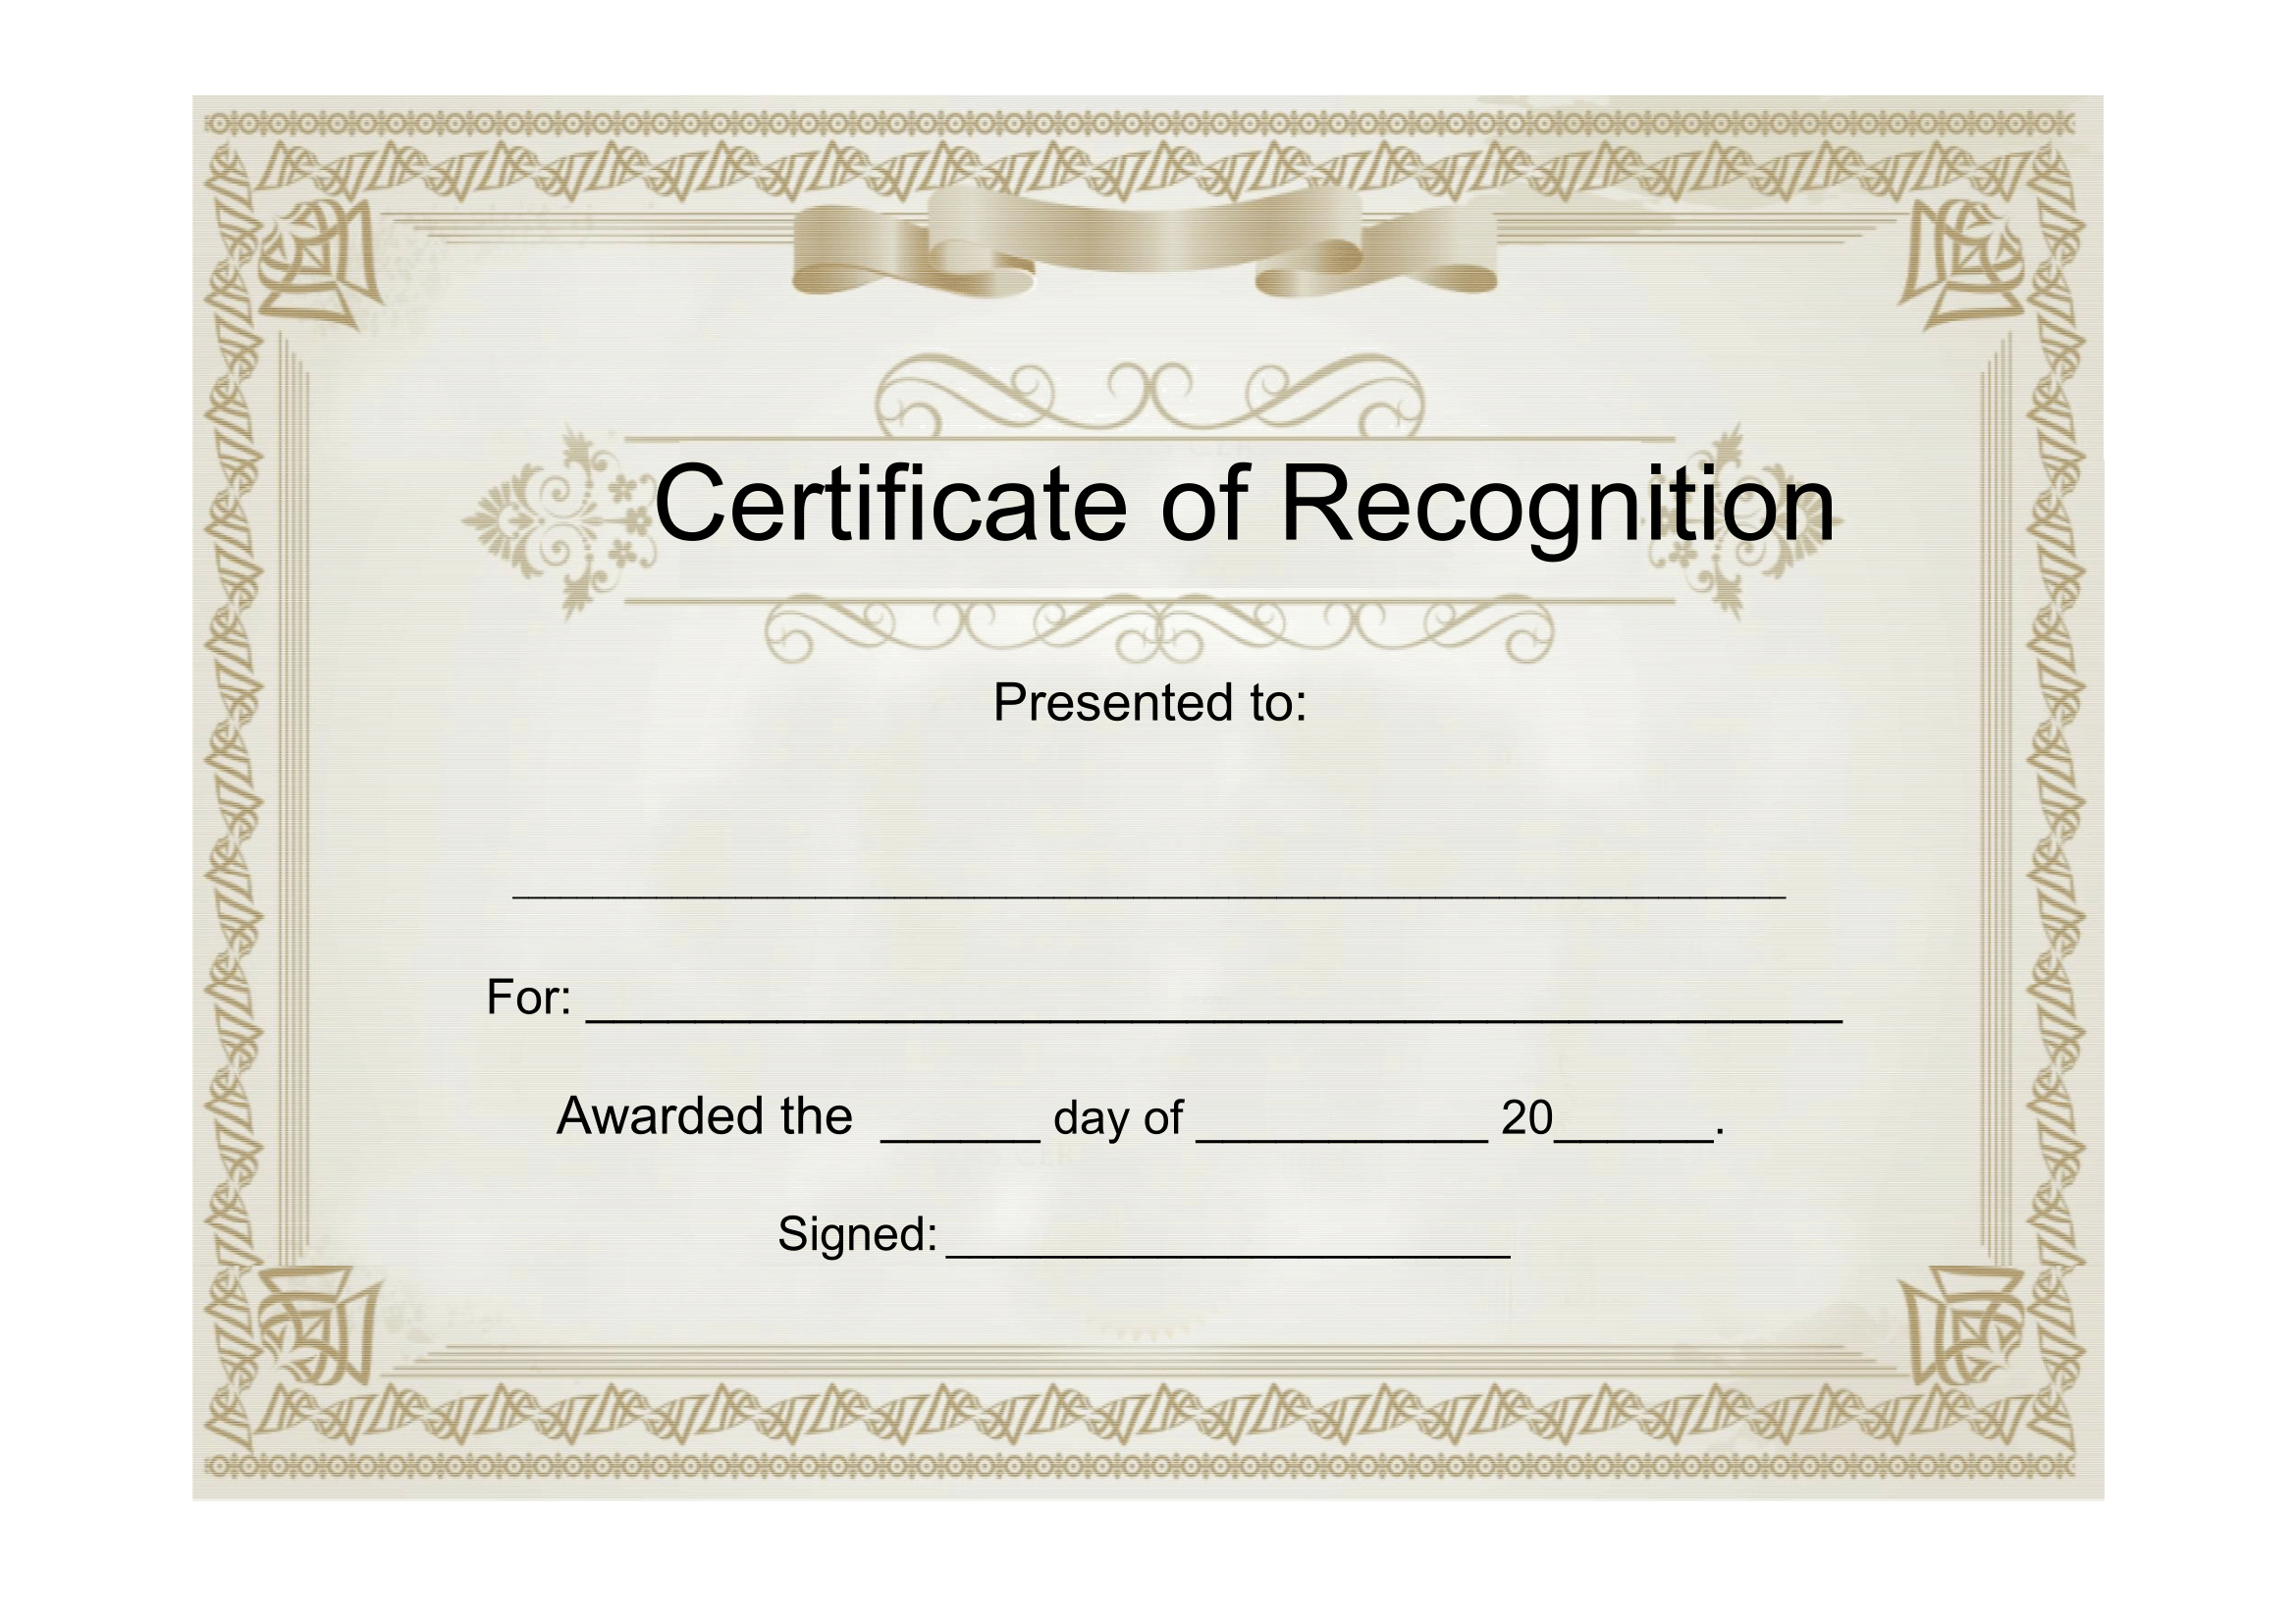 Sample Certificate Of Recognition - Free Download Template Throughout Free Template For Certificate Of Recognition